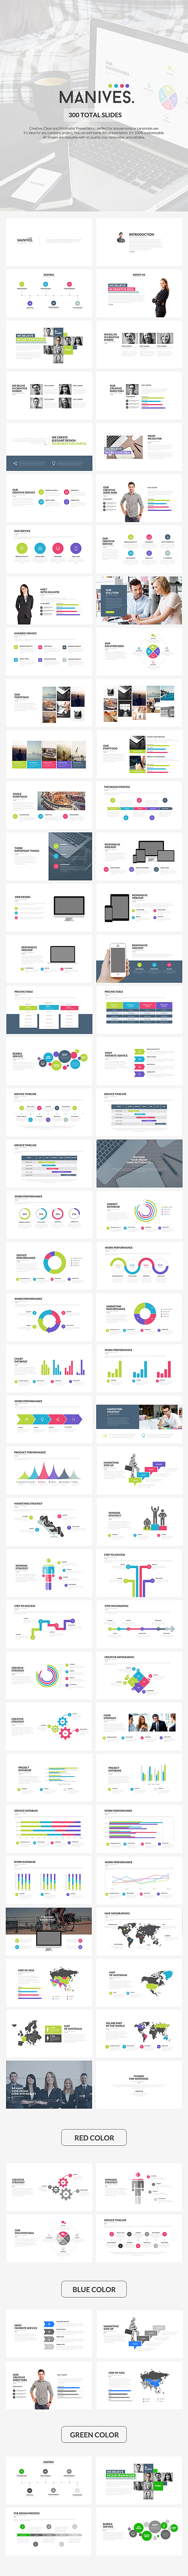 Manives Powerpoint Template